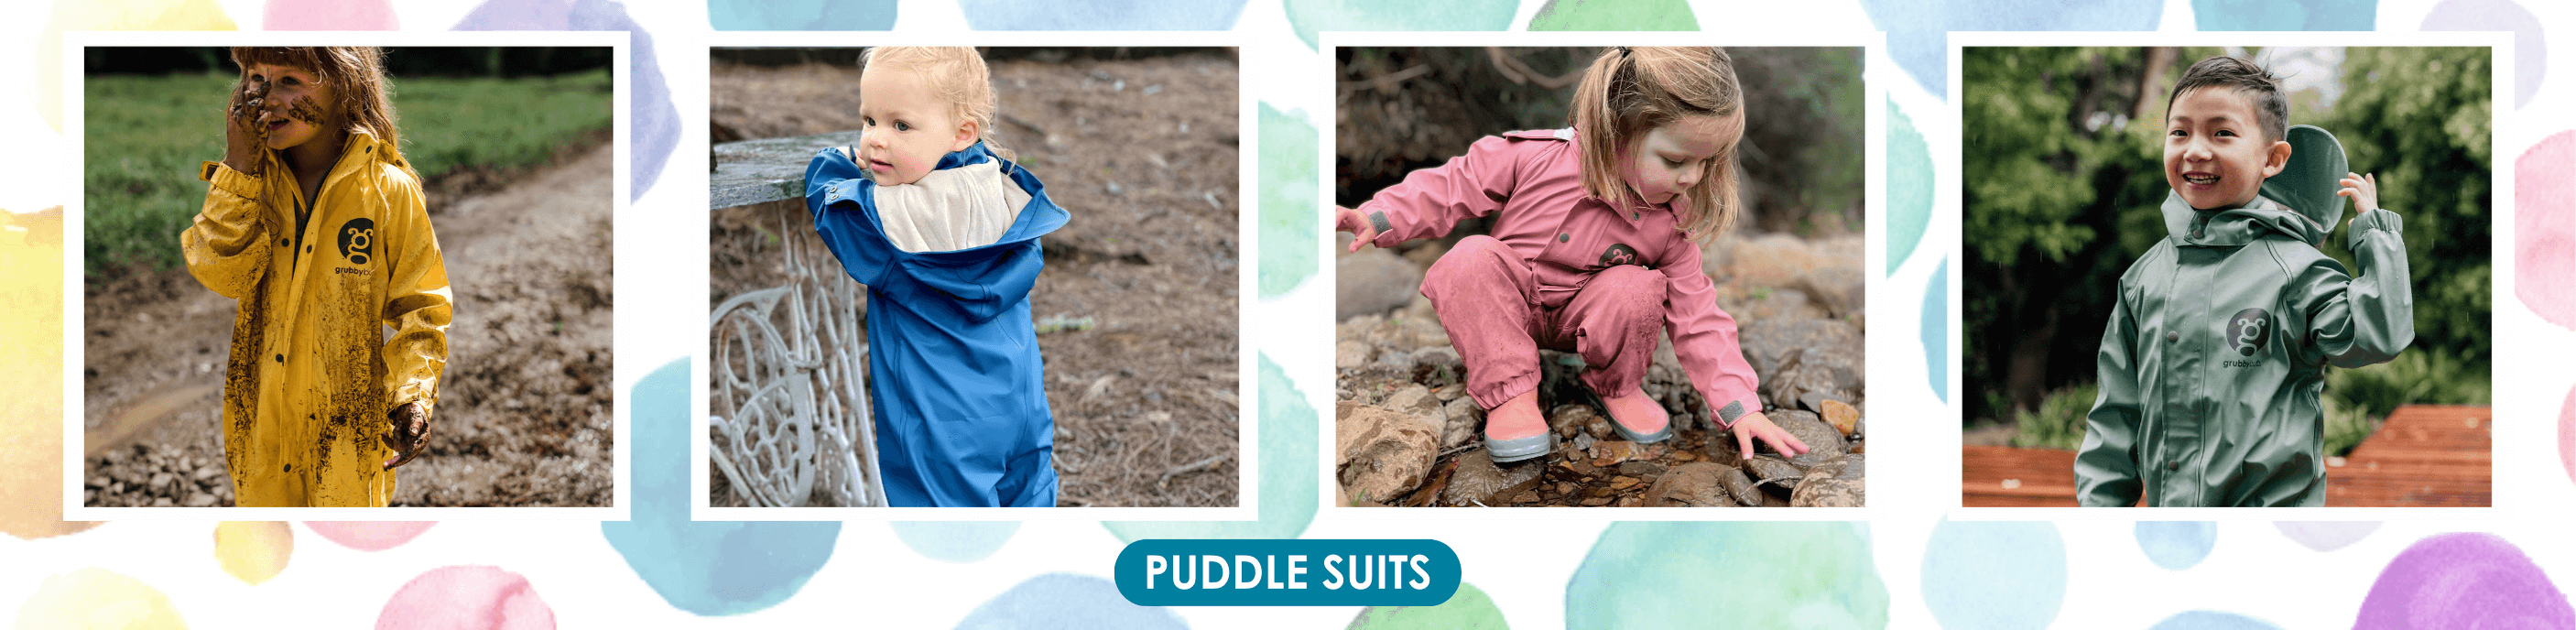 kids wearing waterproof nature play clothes and puddle suits